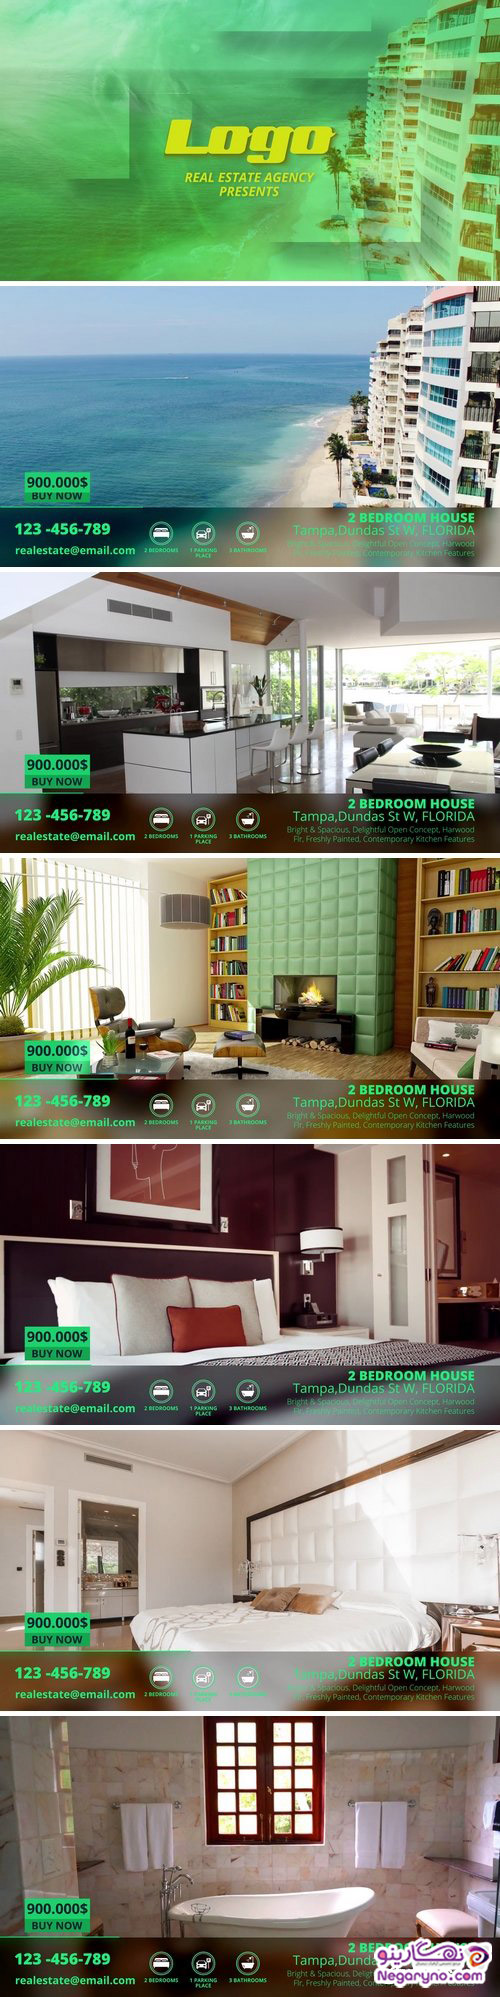 MotionArray---Real-Estate-Promo-After-Effects-Templates-60776-c